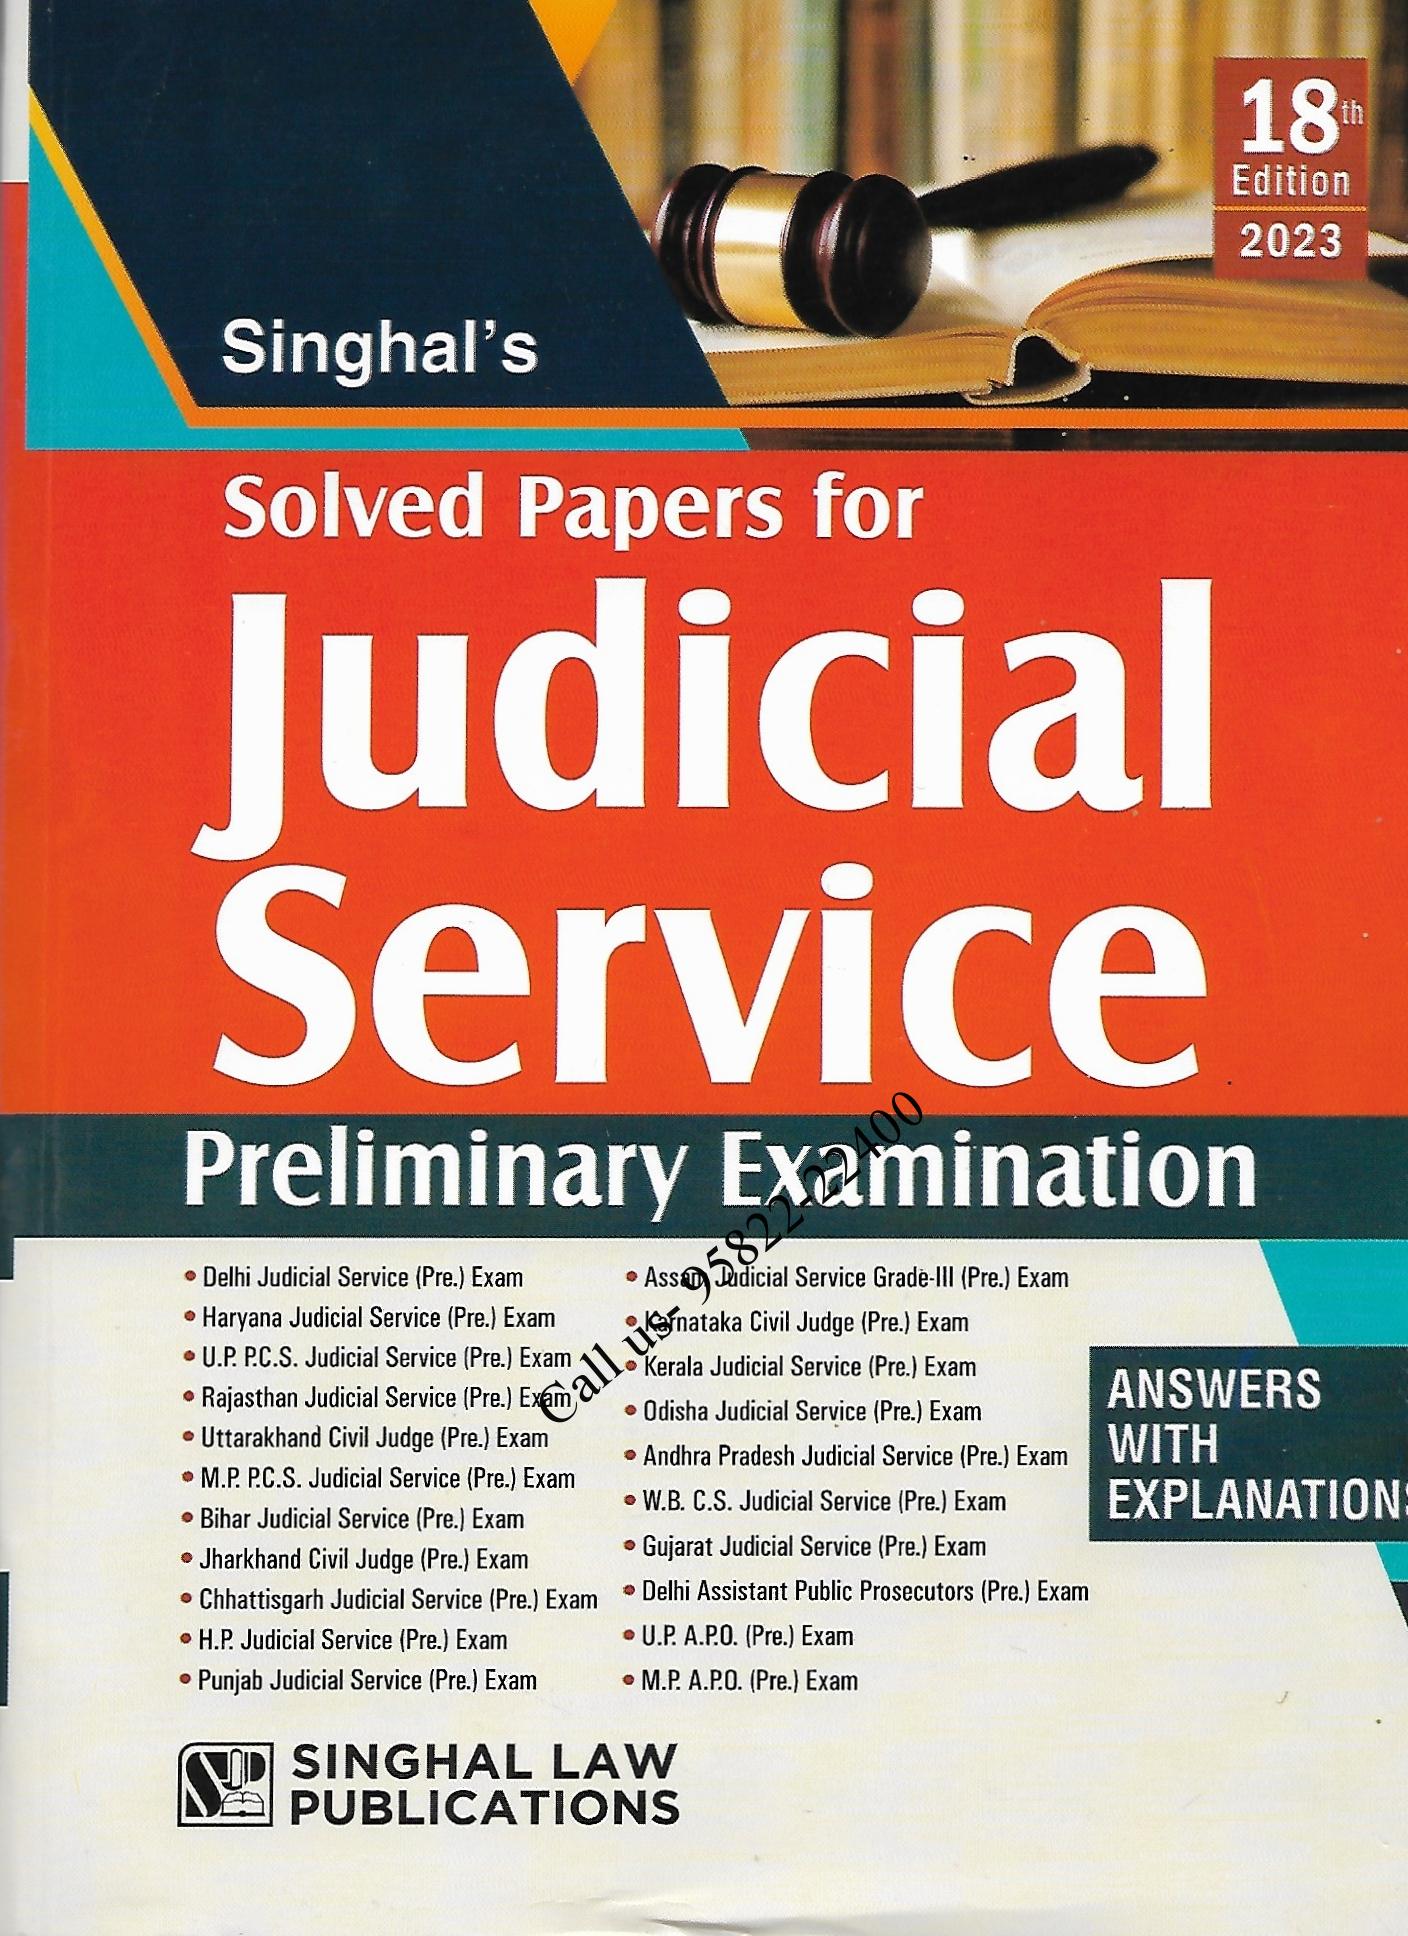 Singhal's Solved Papers for Judicial Service (Preliminary Examination) [18th Edition] 2023